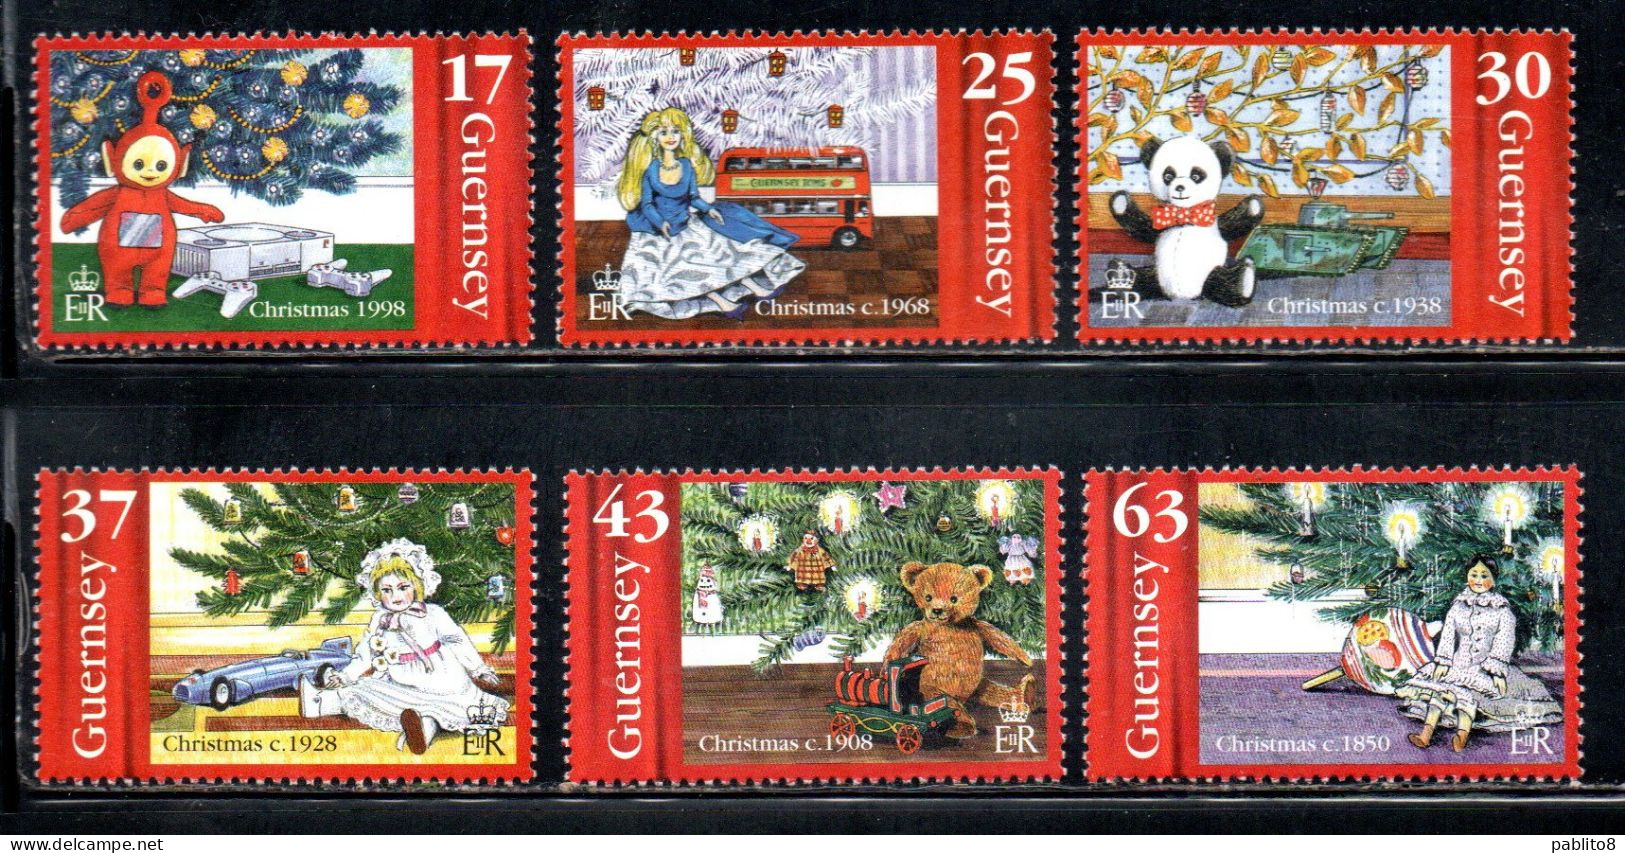 GUERNSEY GUERNESEY 1998 CHRISTMAS NATALE NOEL WEIHNACHTEN NAVIDAD NATAL COMPLETE SET SERIE COMPLETA MNH - Guernesey